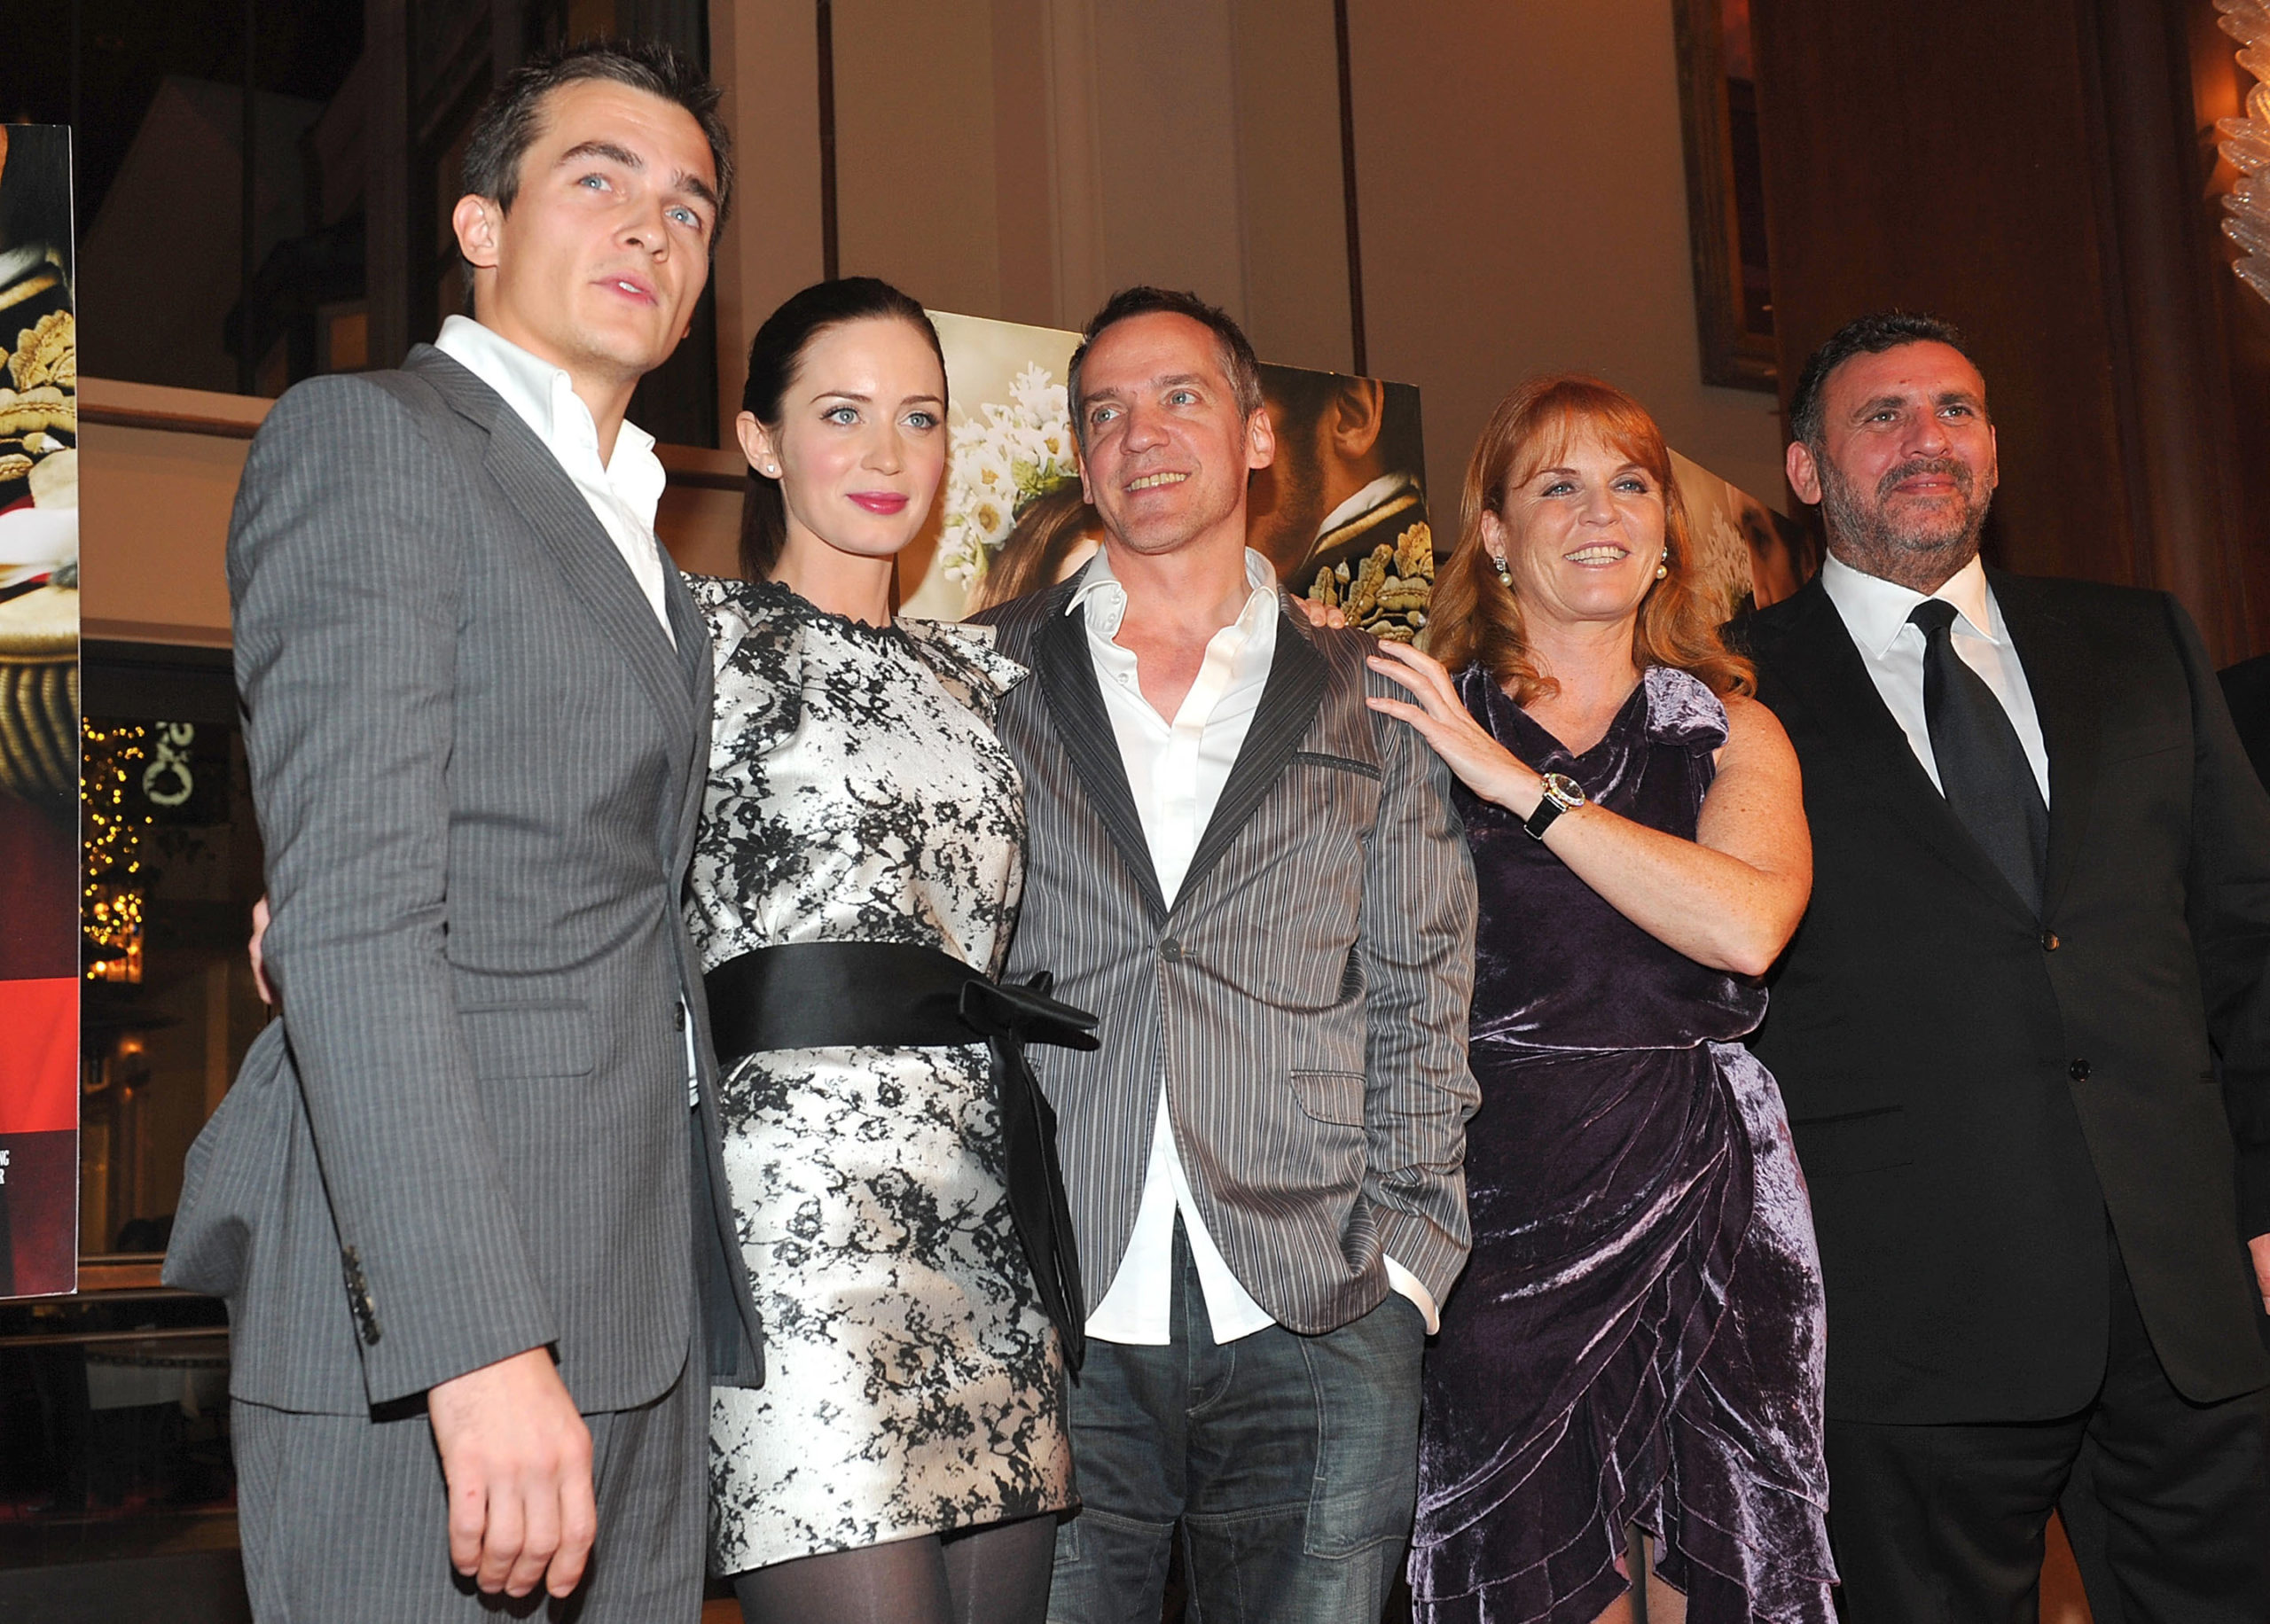 LOS ANGELES, CA - DECEMBER 03: (L-R) Actor Rupert Friend, actress Emily Blunt, director Jean-Marc Vallee, producer Sarah Ferguson, Dutchess of York and producer Graham King arrive at the U.S. premiere of Apparition's "The Young Victoria" held at the Pacific Grove Theaters on December 3, 2009 in Los Angeles, California. (Photo by Alberto E. Rodriguez/Getty Images)